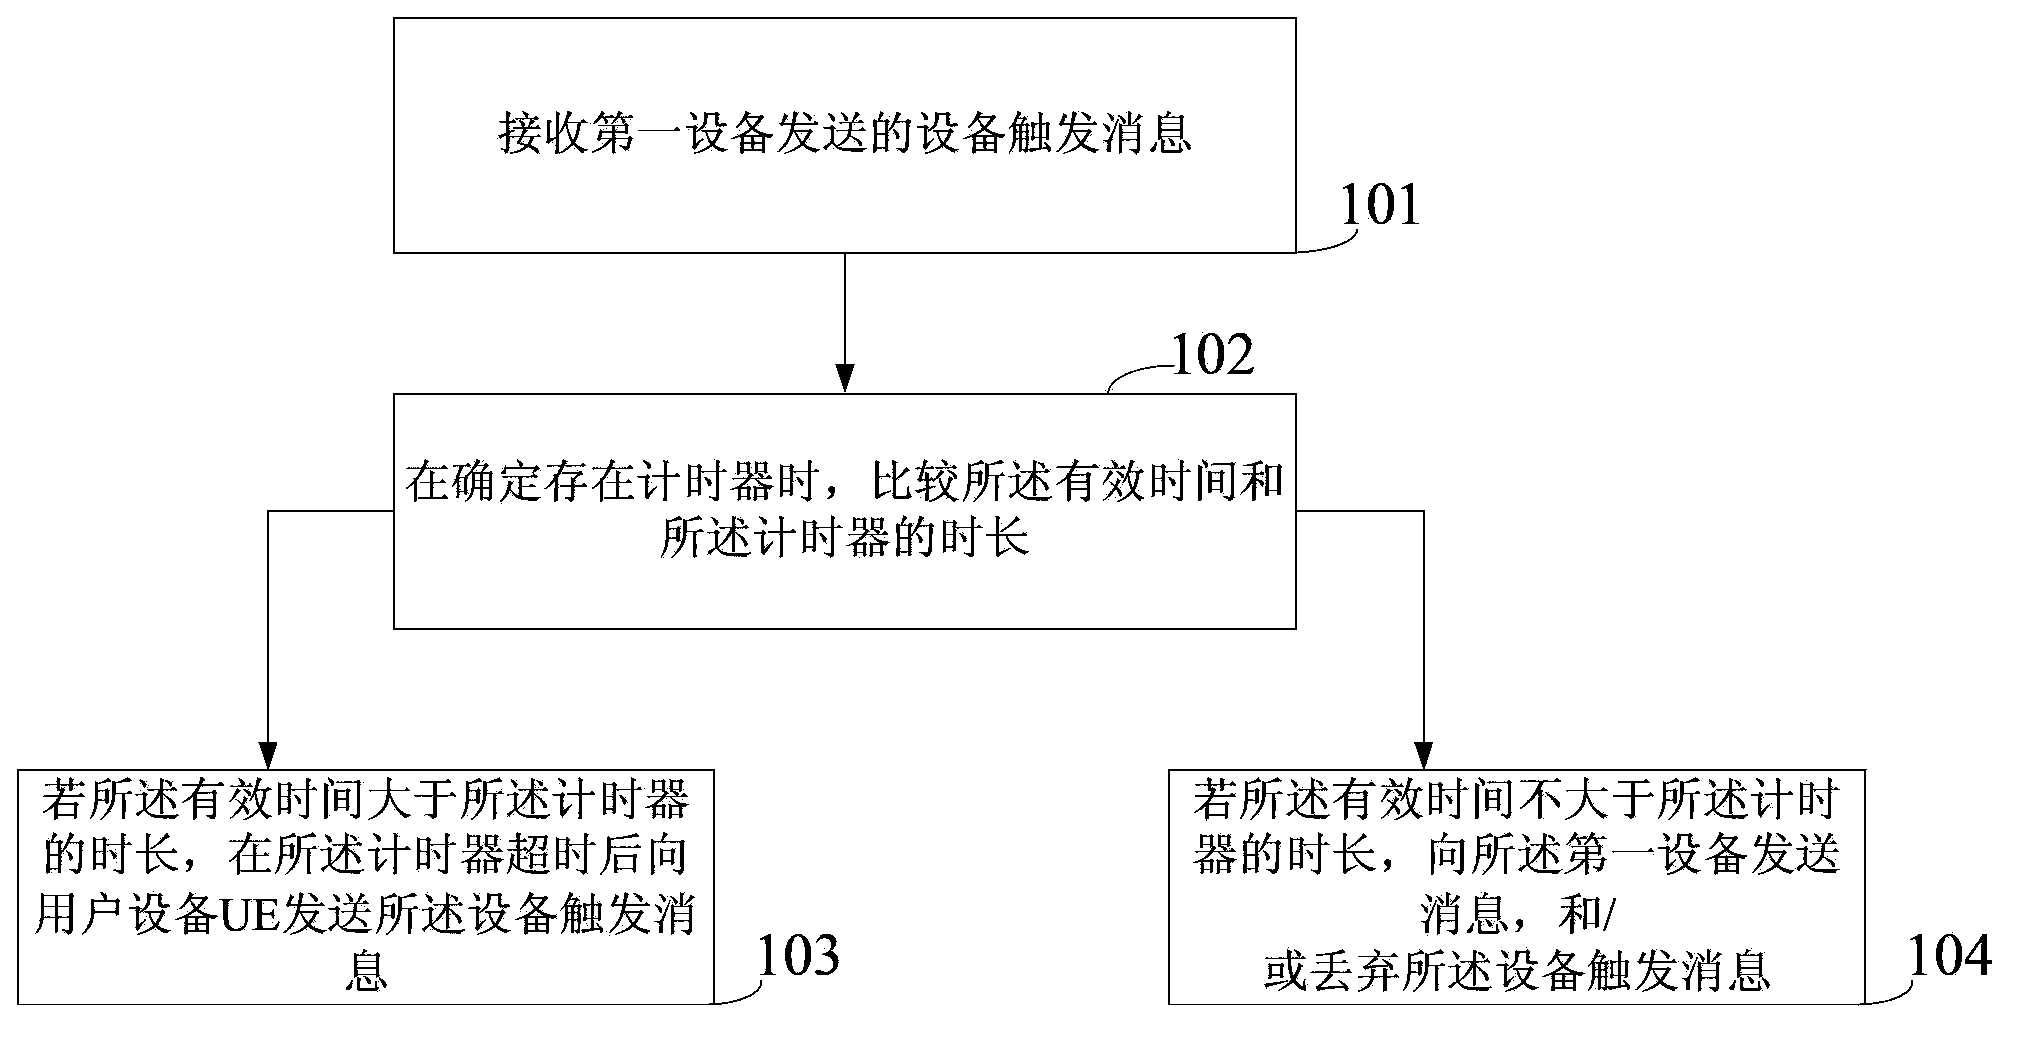 Method for transmission device triggering information and core network device